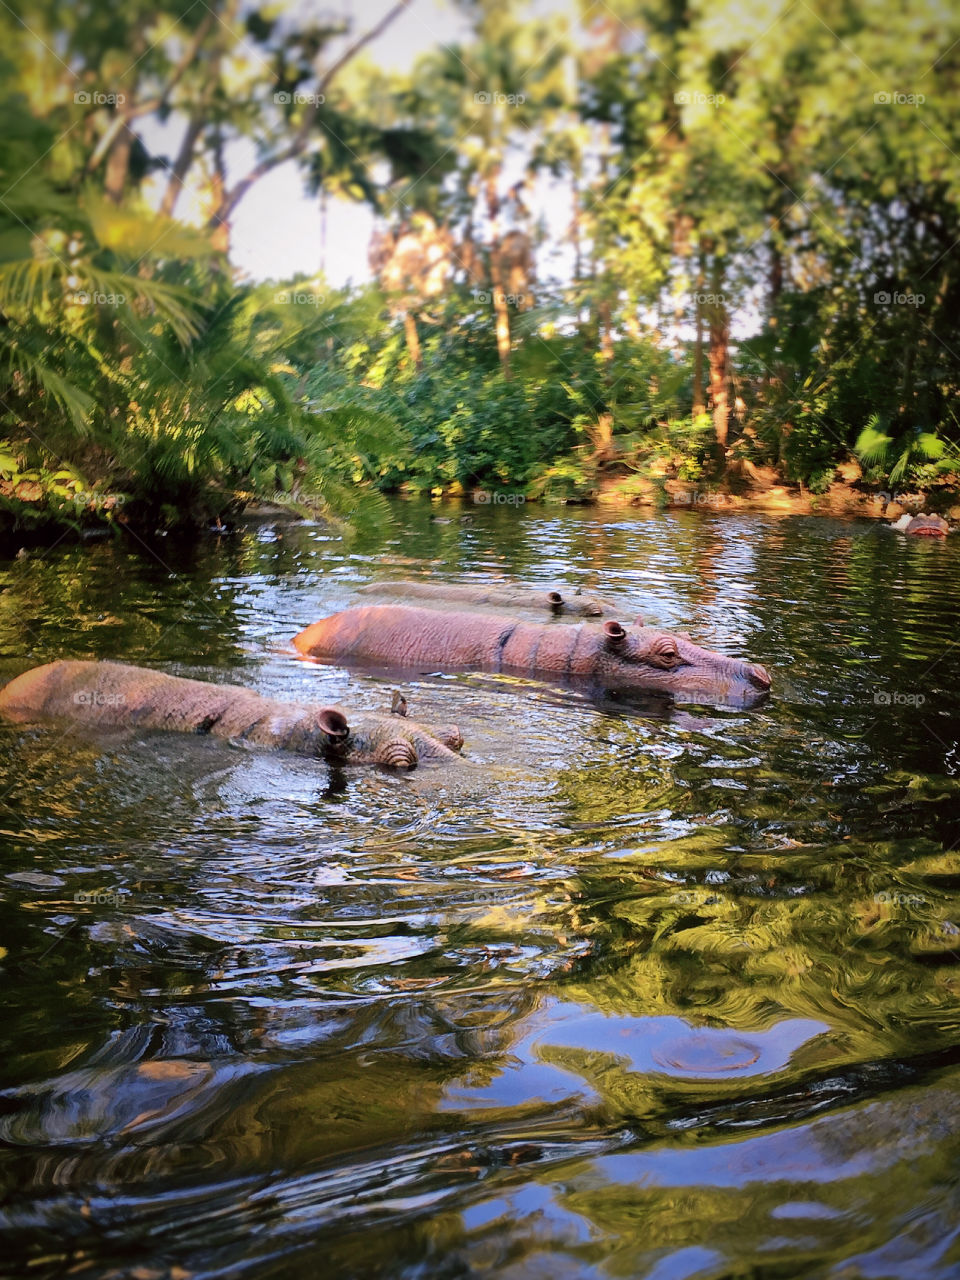 Hippos are resting in the jungle river